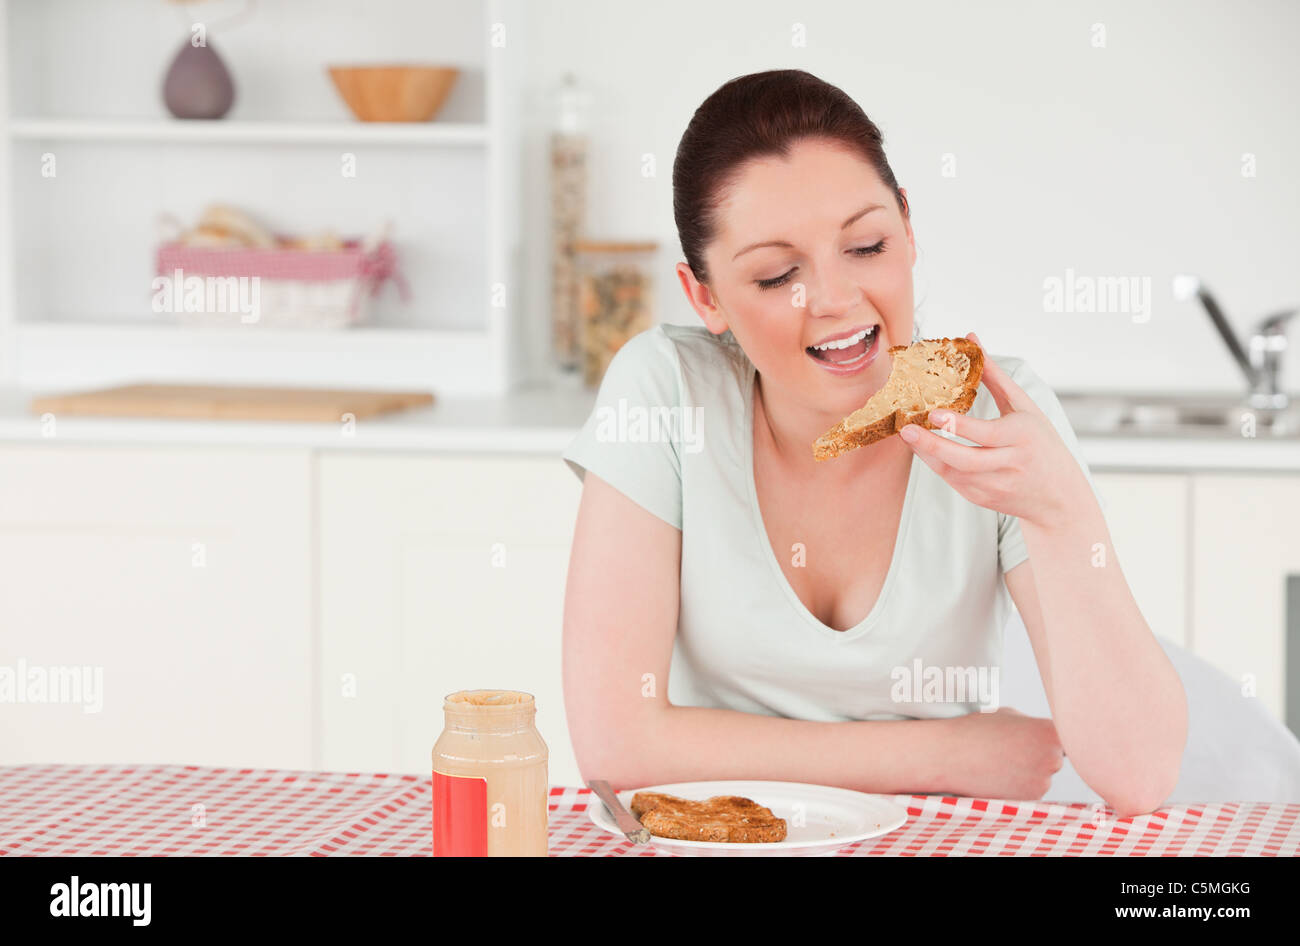 Attractive woman posing while eating a slice of bread Stock Photo